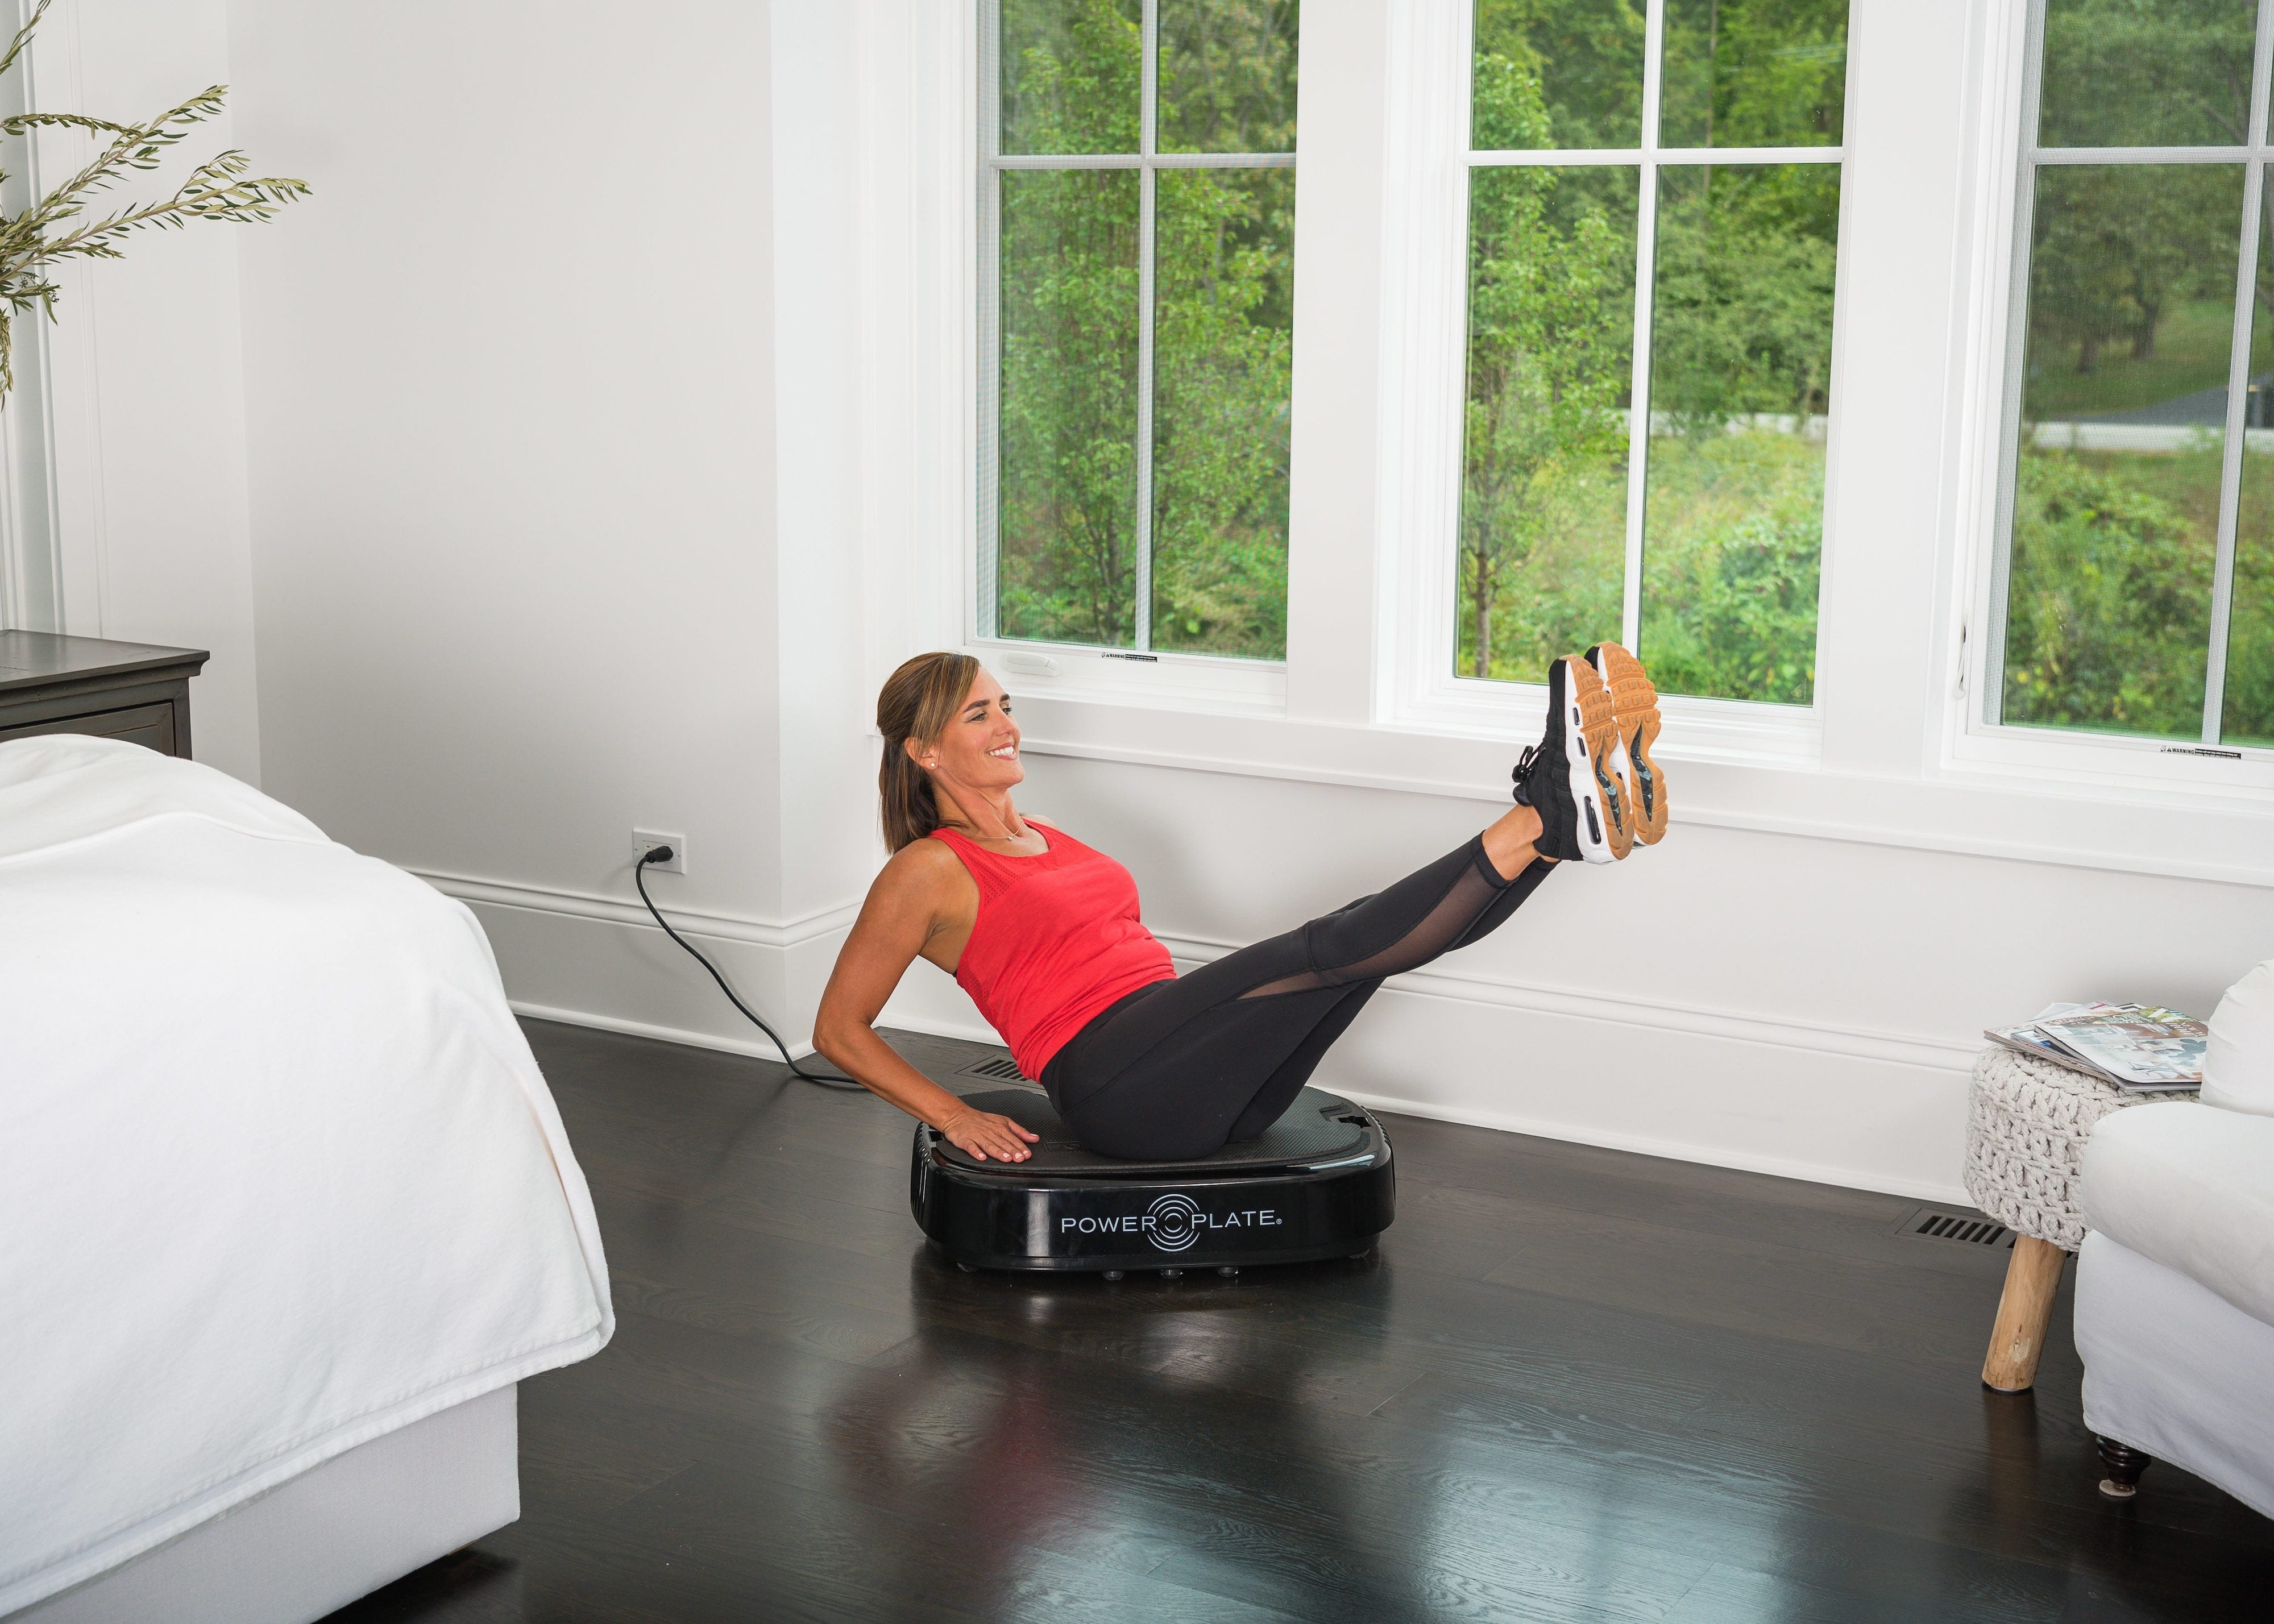 Personal Power Plate®